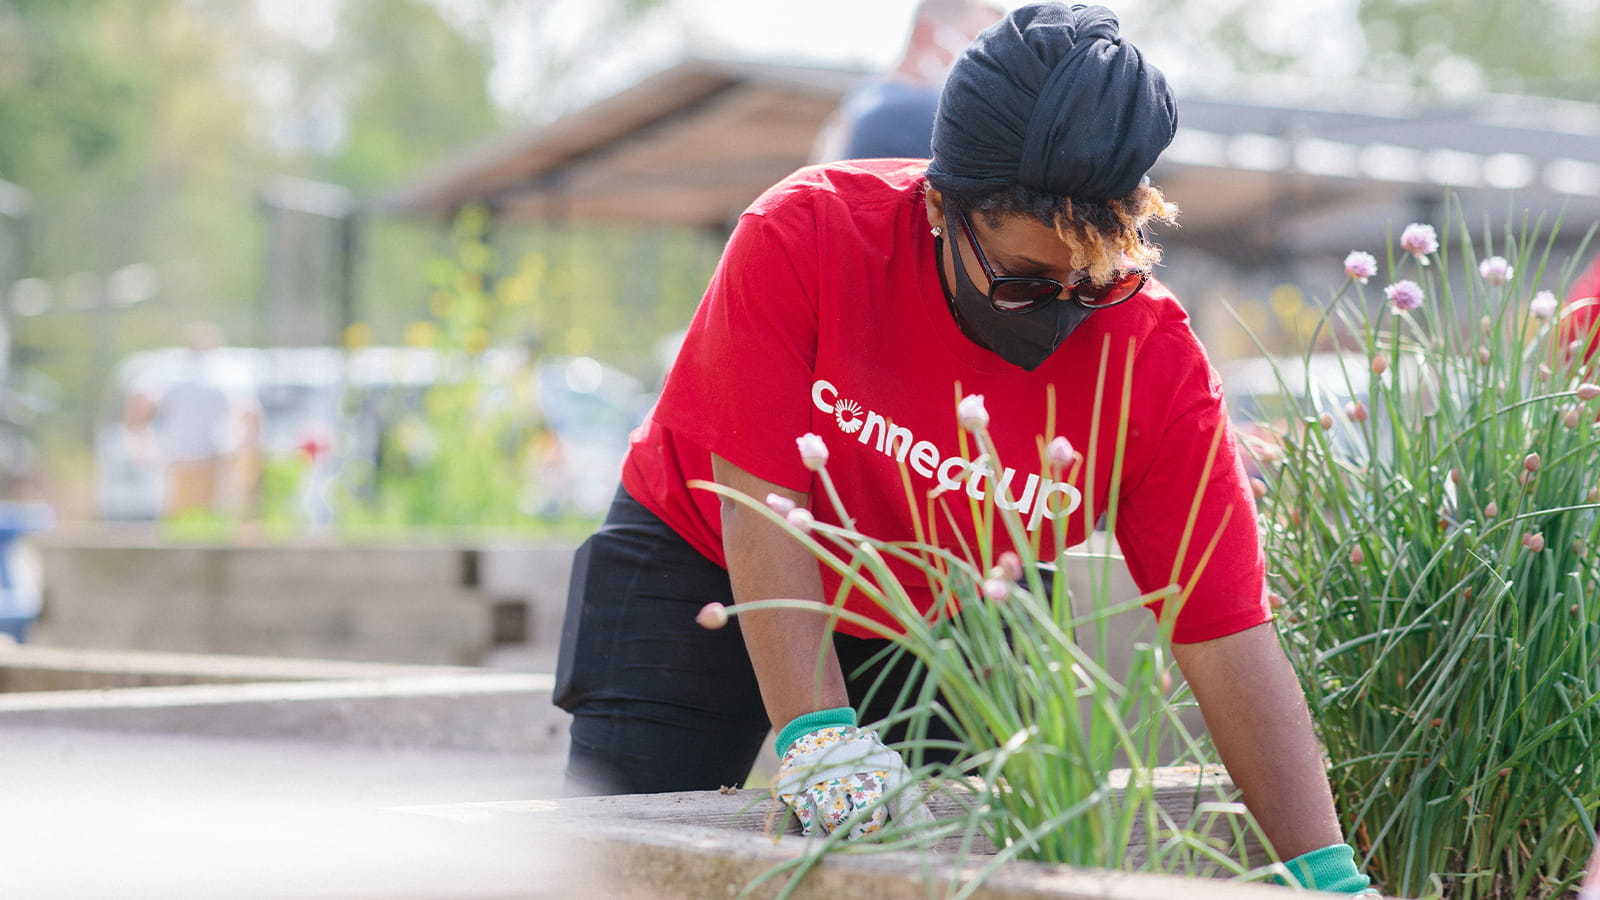 A volunteer wearing a red shirt and gardening gloves reaches into a planter at a community garden in Connecticut